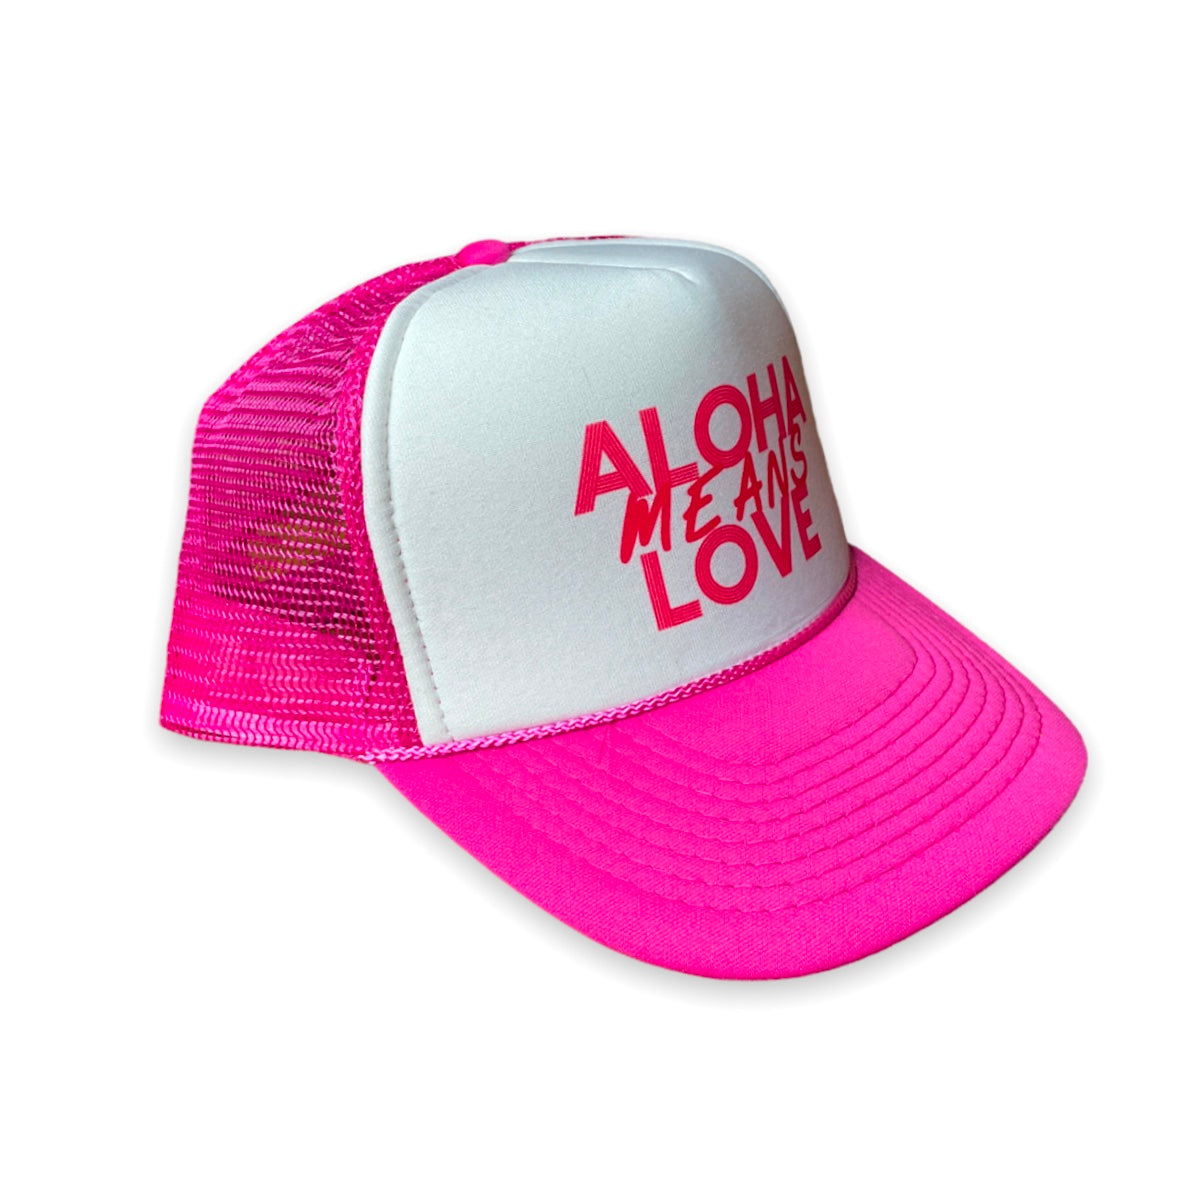 Aloha Means Love Pink and White Trucker Hat